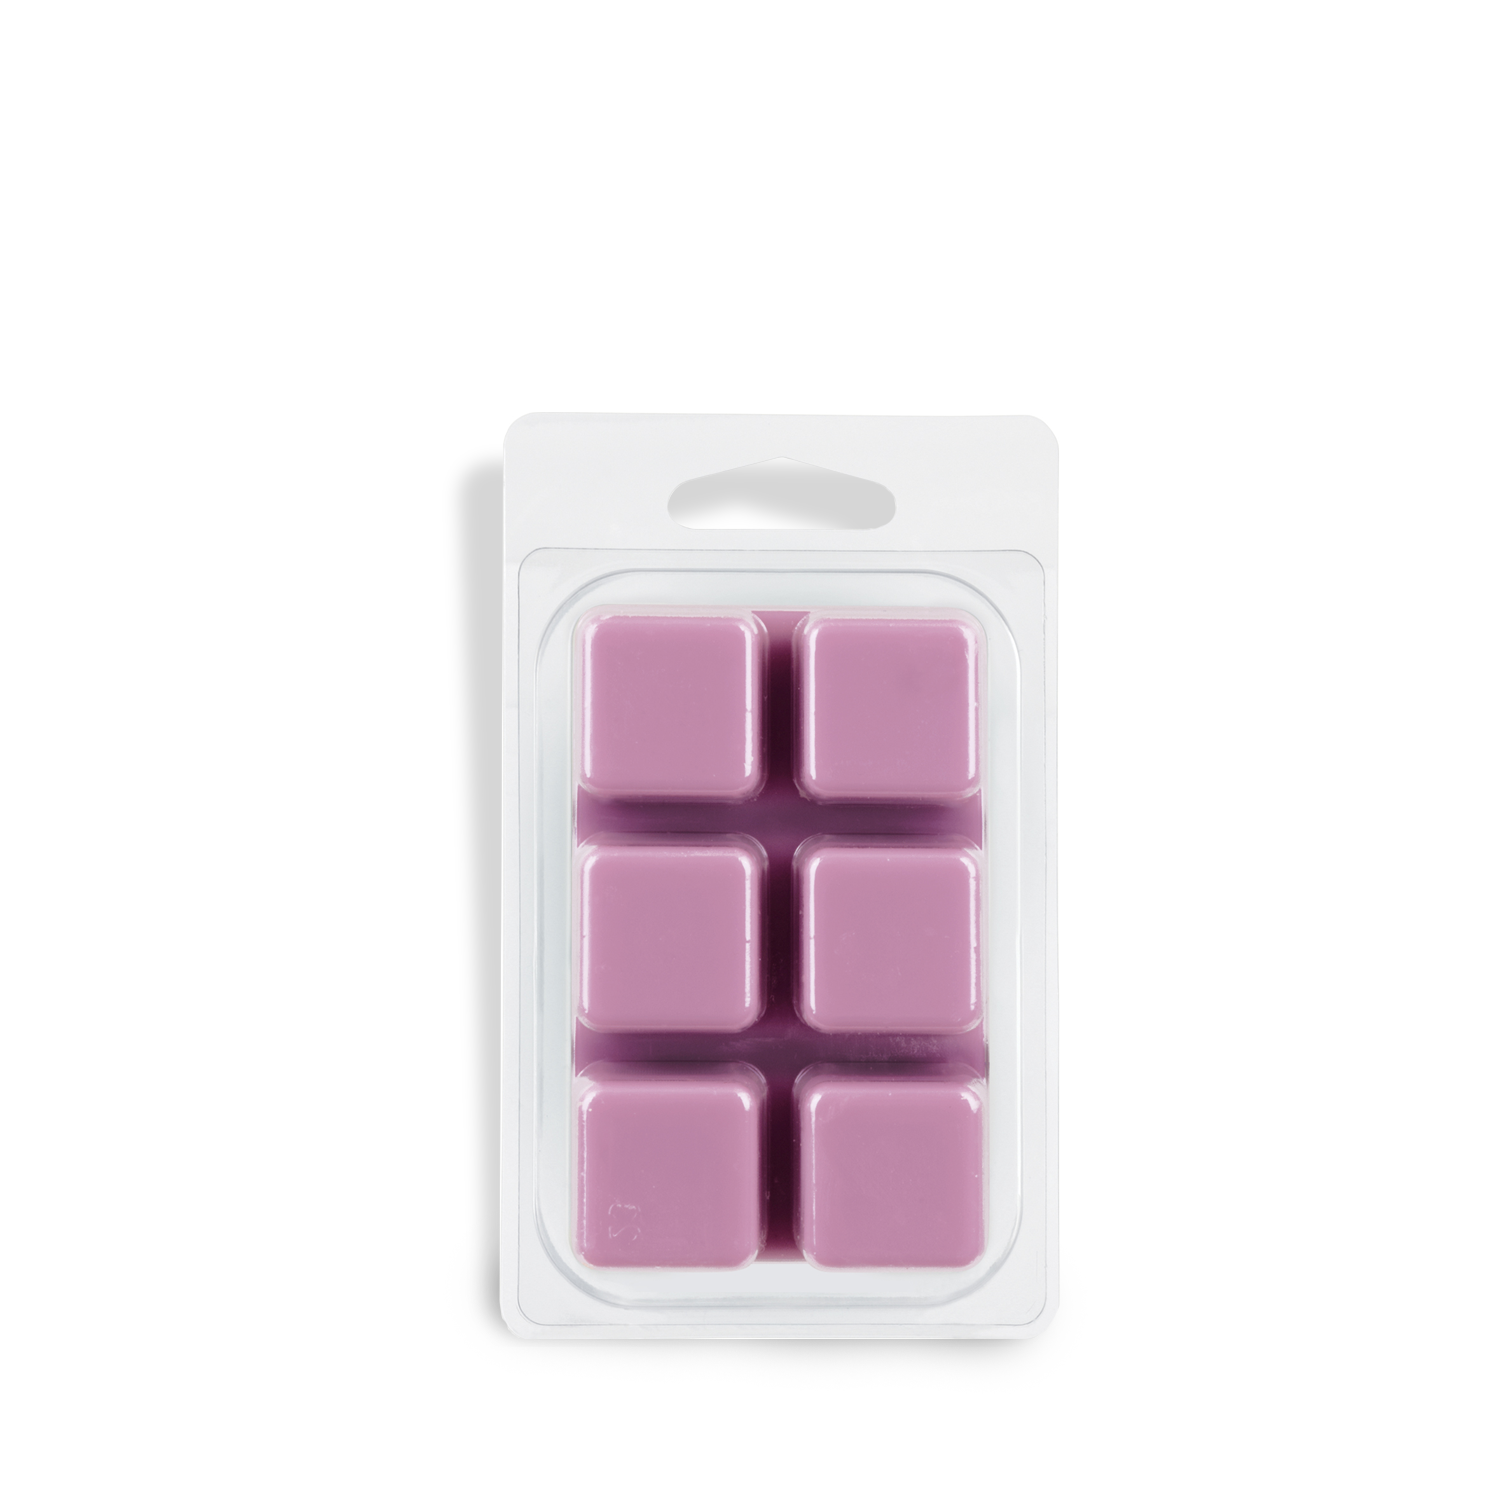 A package of six Tuscany Candle® SEASONAL Lavender Bellini Scented Wax Melts (2.5 oz) isolated on a white background.